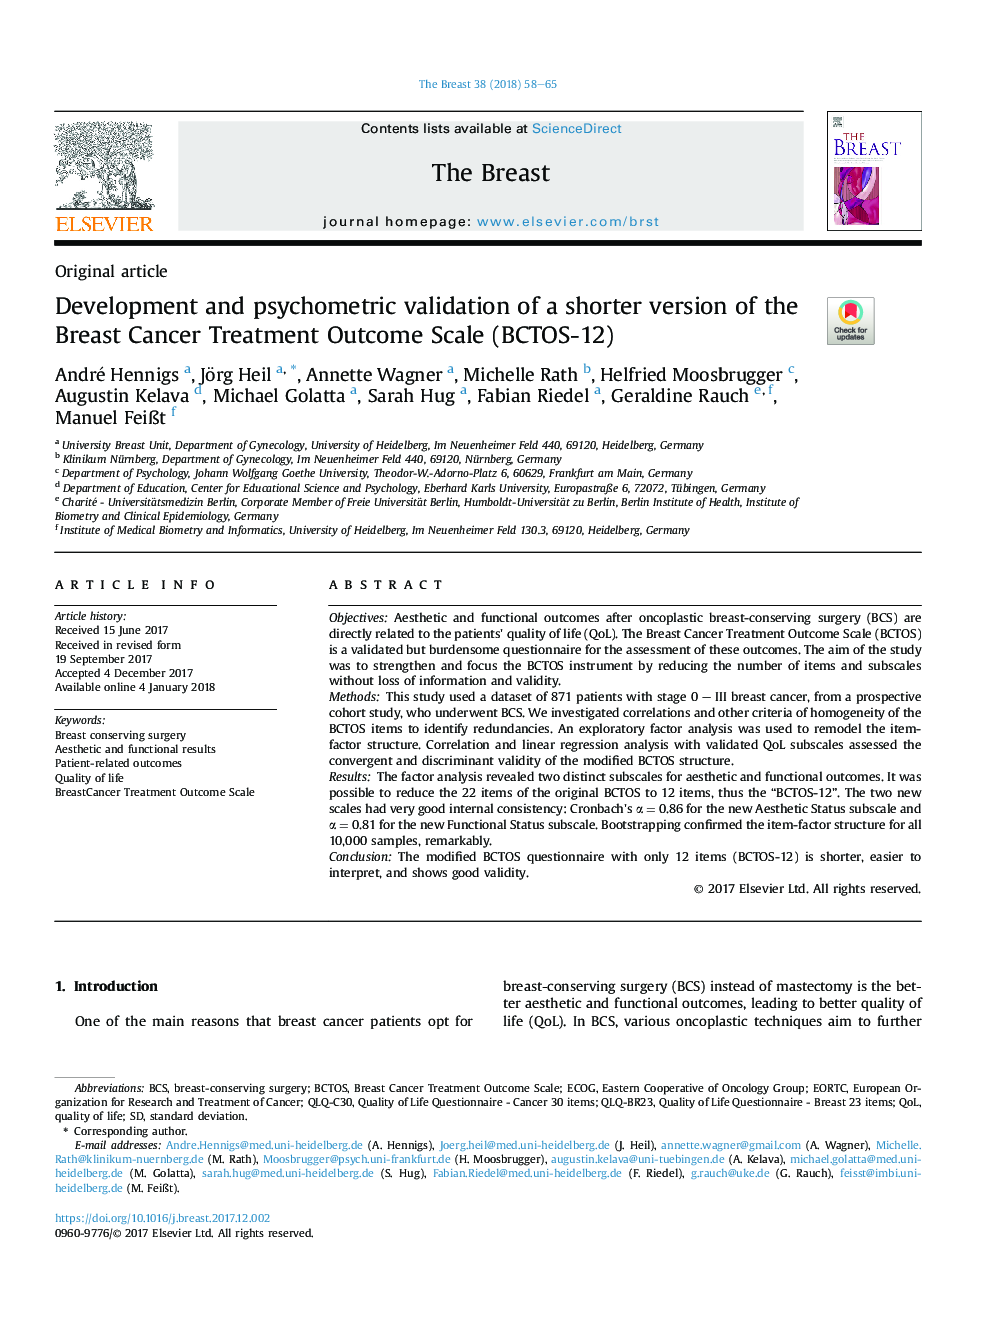 Development and psychometric validation of a shorter version of the Breast Cancer Treatment Outcome Scale (BCTOS-12)